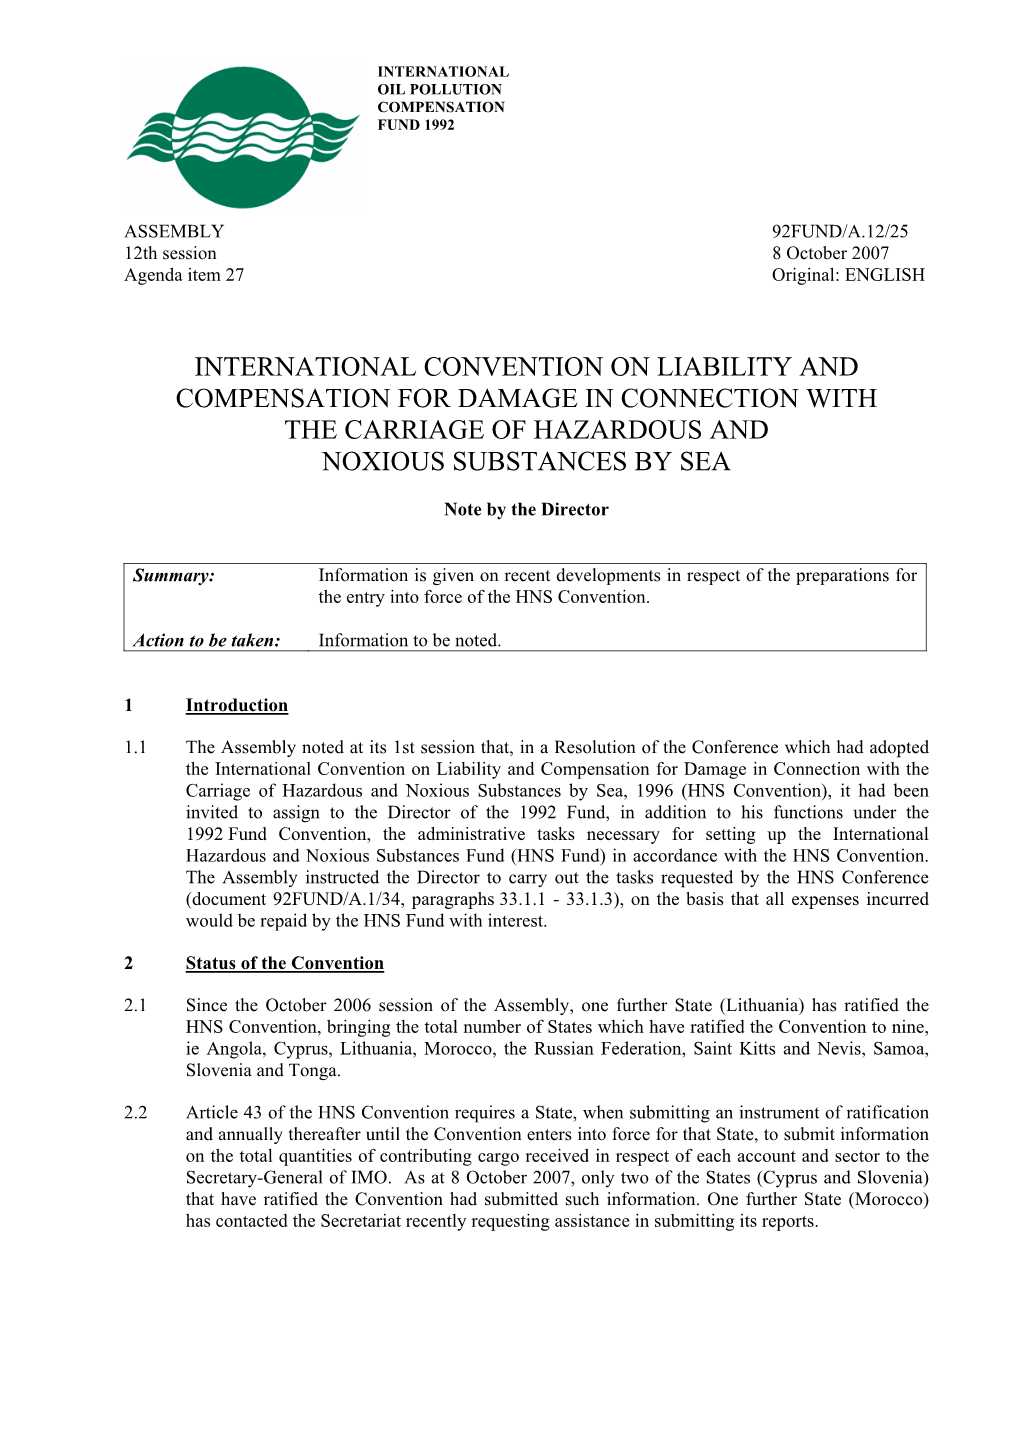 International Convention on Liability and Compensation for Damage in Connection with the Carriage of Hazardous and Noxious Substances by Sea